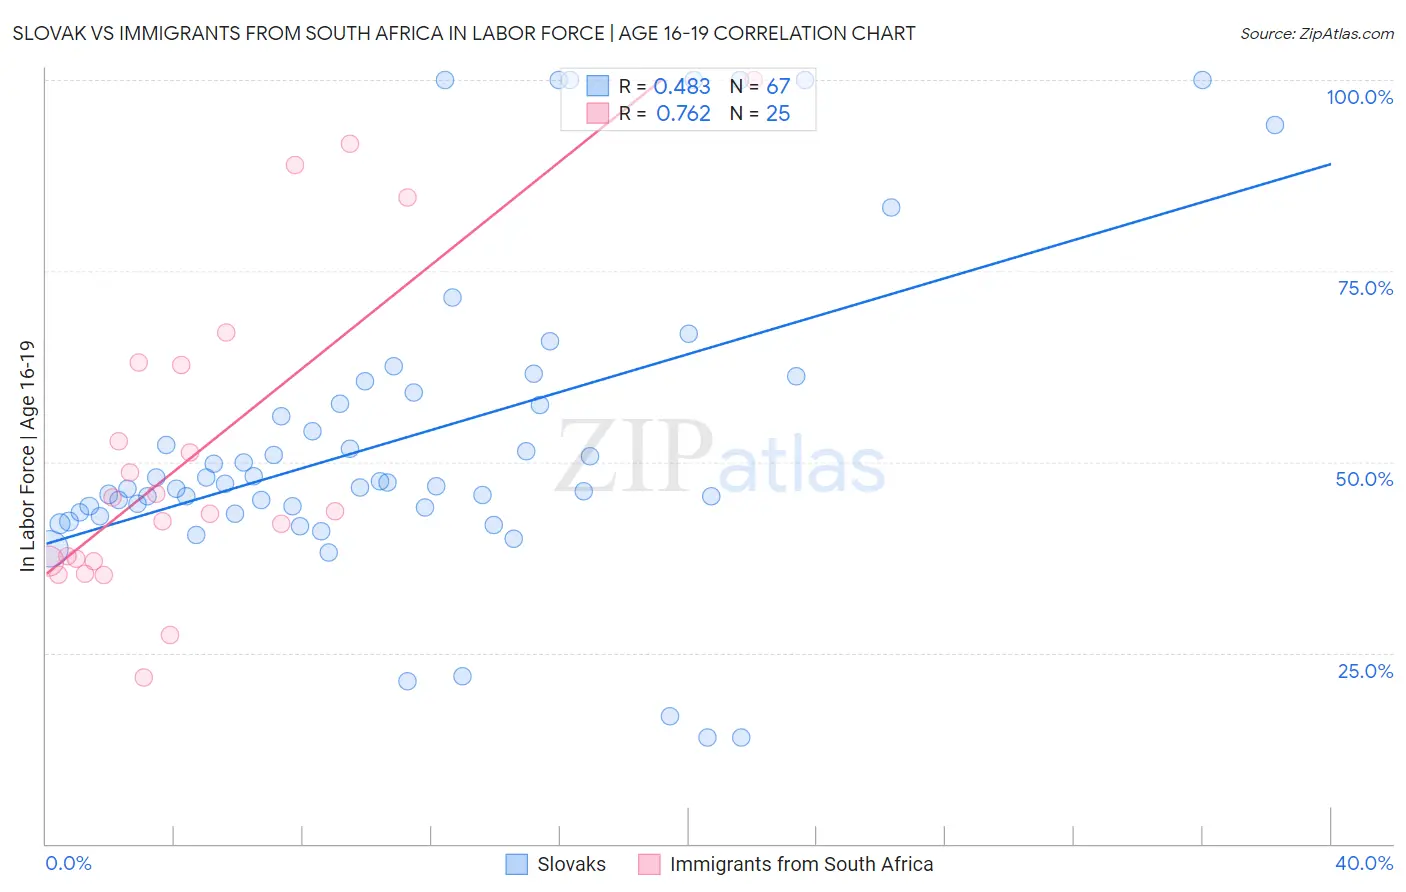 Slovak vs Immigrants from South Africa In Labor Force | Age 16-19